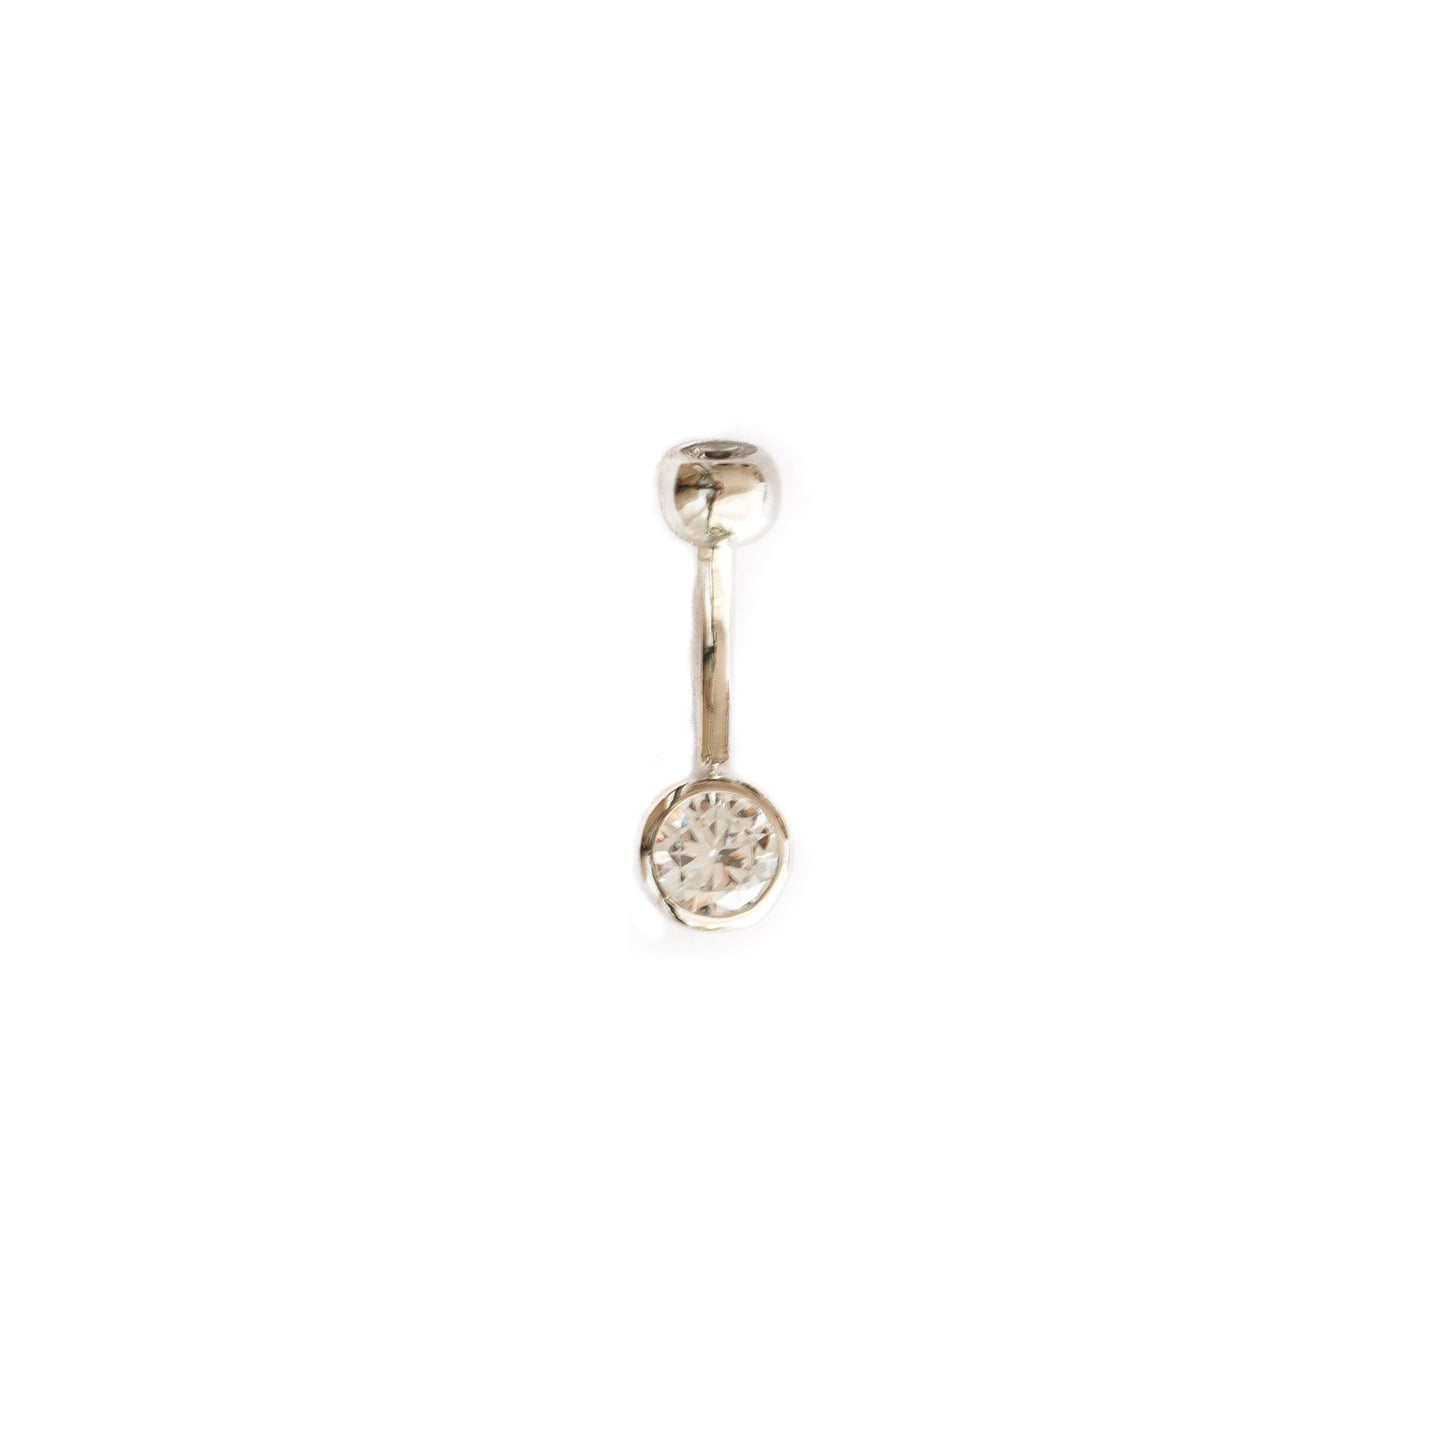 Solid 925 Silver | Small Belly Ring with Sparkling Cubic Zirconia Crystals | 6mm 1/4" 8mm 5/16" 10mm 3/8" - Sturdy South